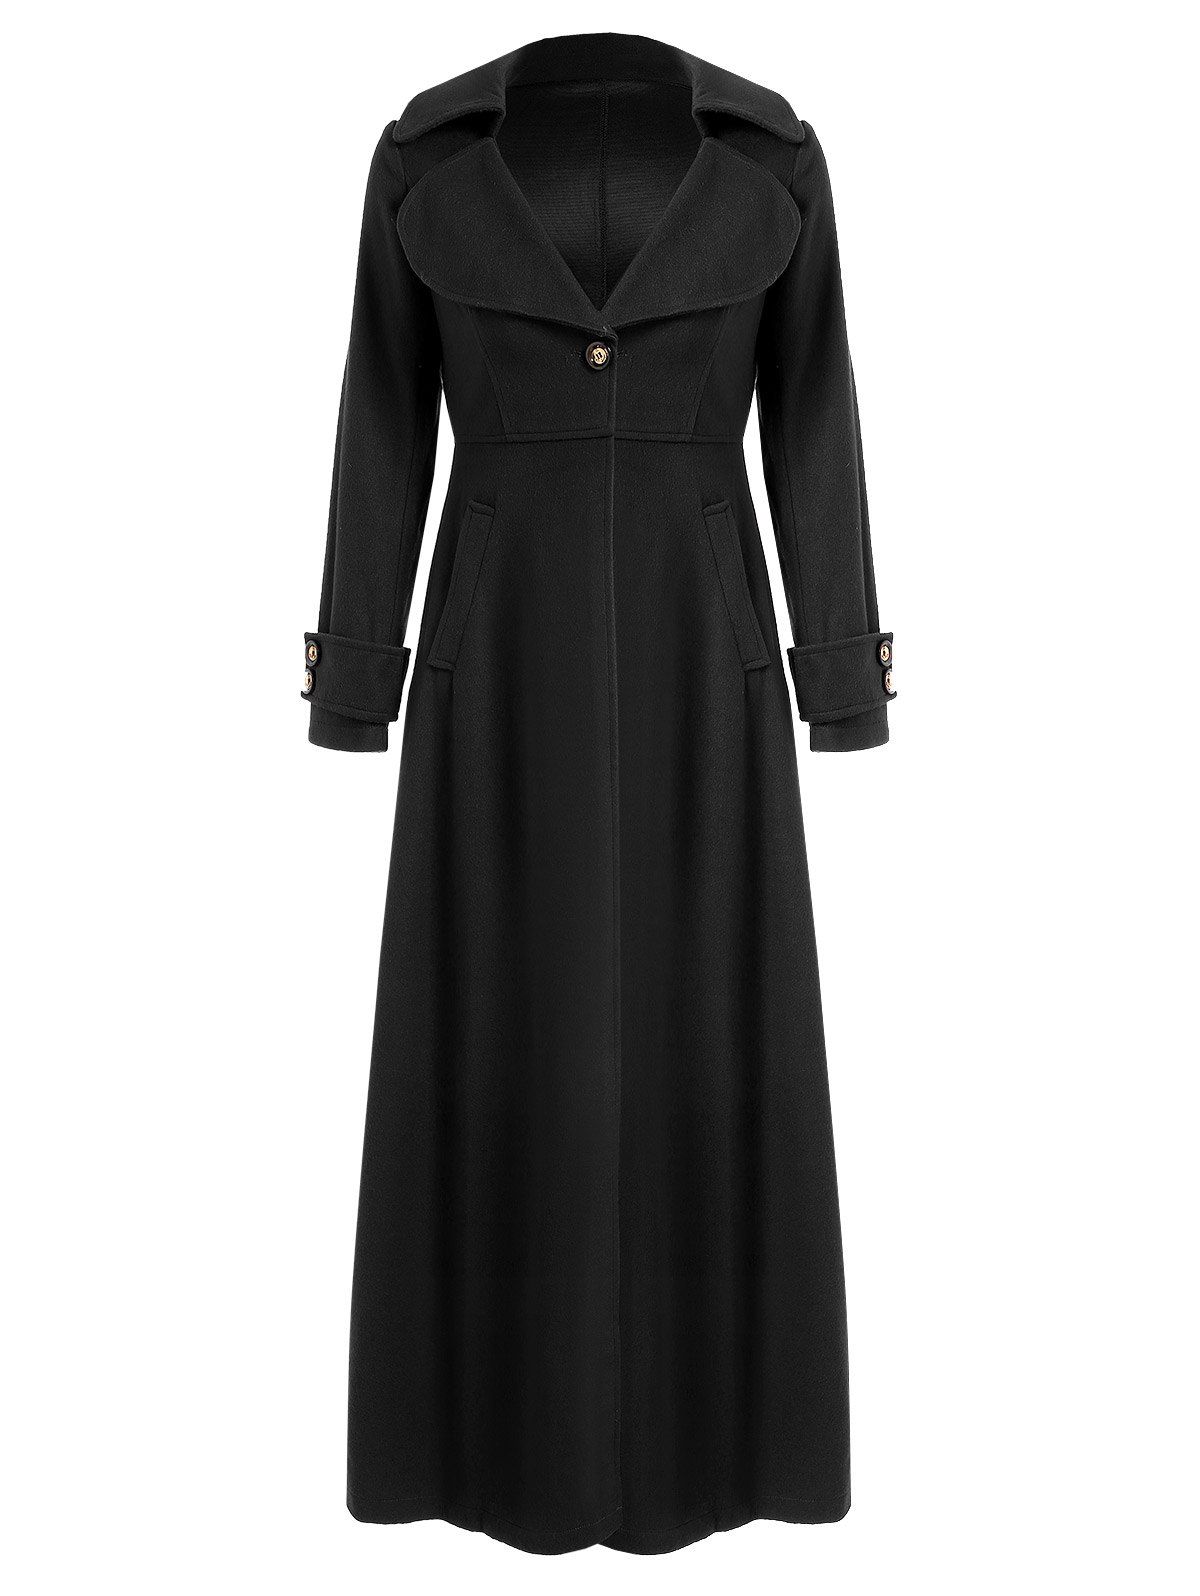 [38% OFF] Elegant Solid Color Turn-Down Collar Tunic Maxi Coat For ...